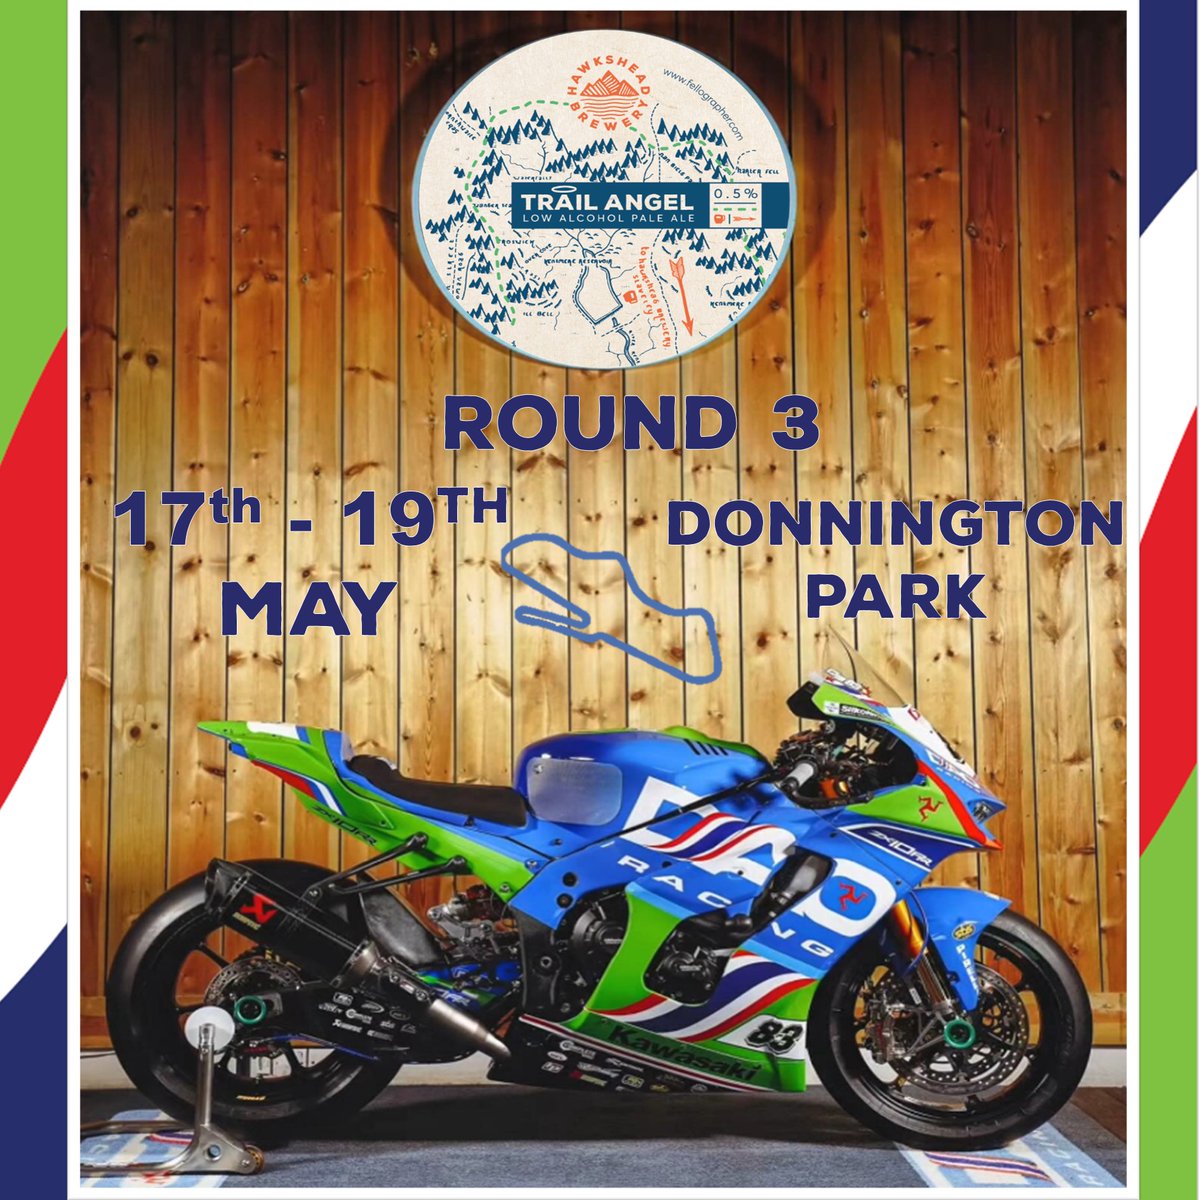 It's round 3 at Donnington Park this weekend 🏍 Best of luck to DAO Racing Team! #daoracing #round3 #brewery #Trailangel